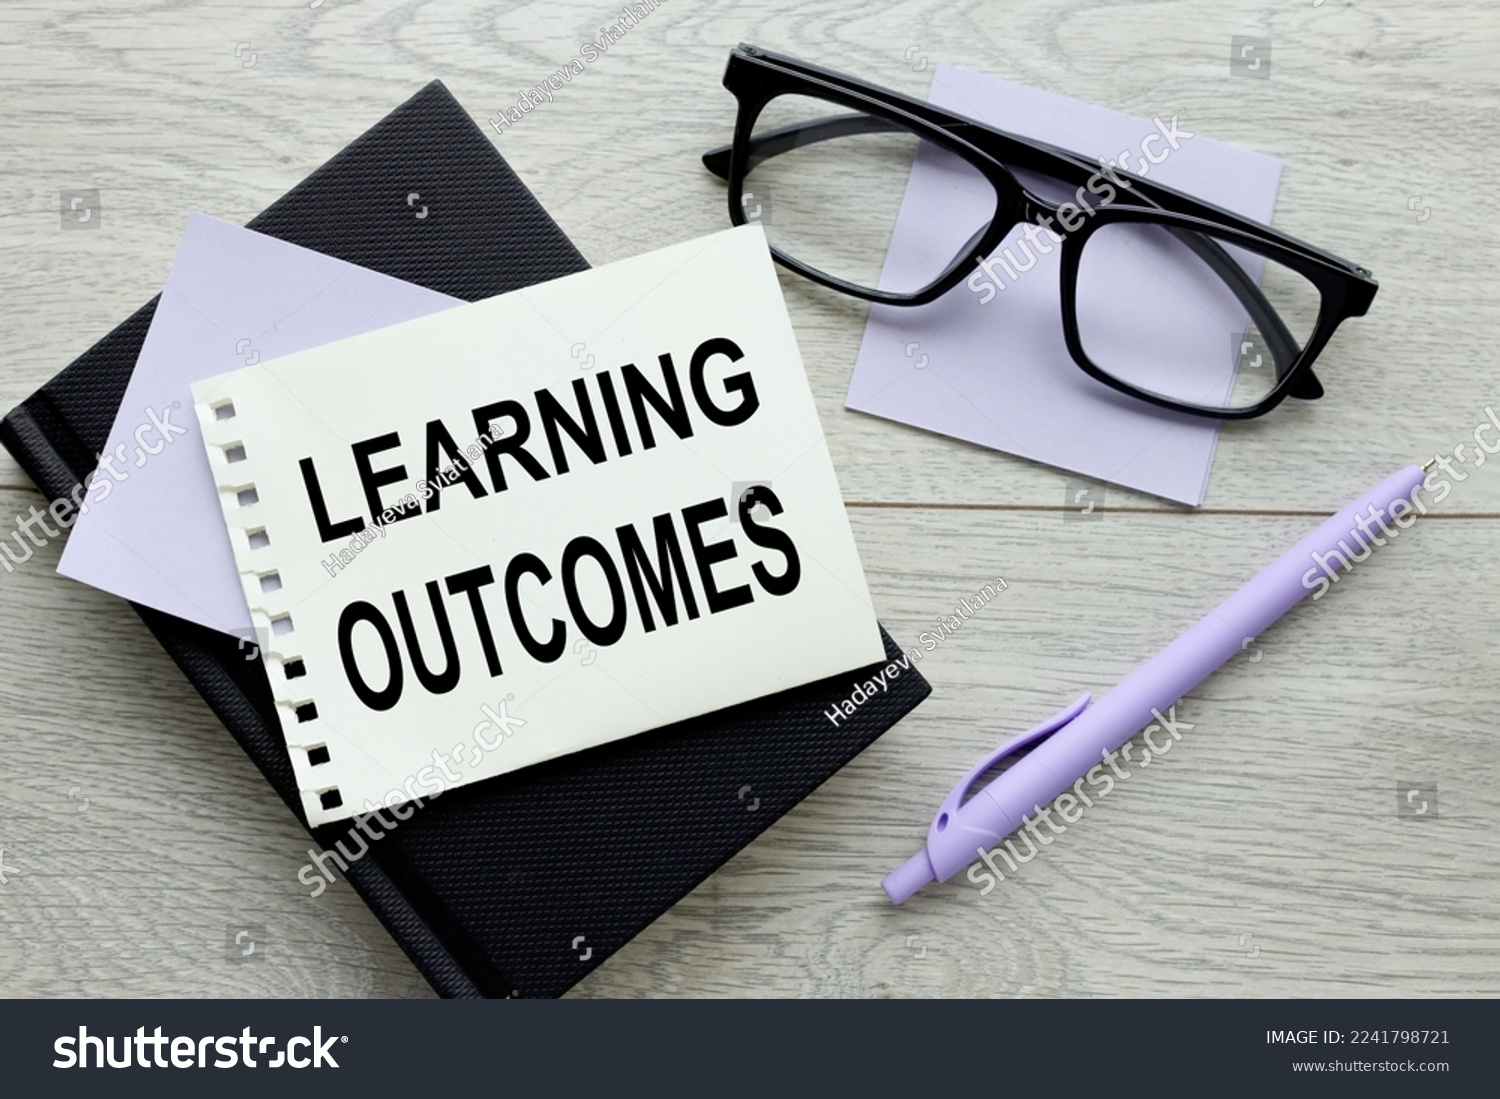 LEARNING OUTCOMES text on paper on wooden background. #2241798721